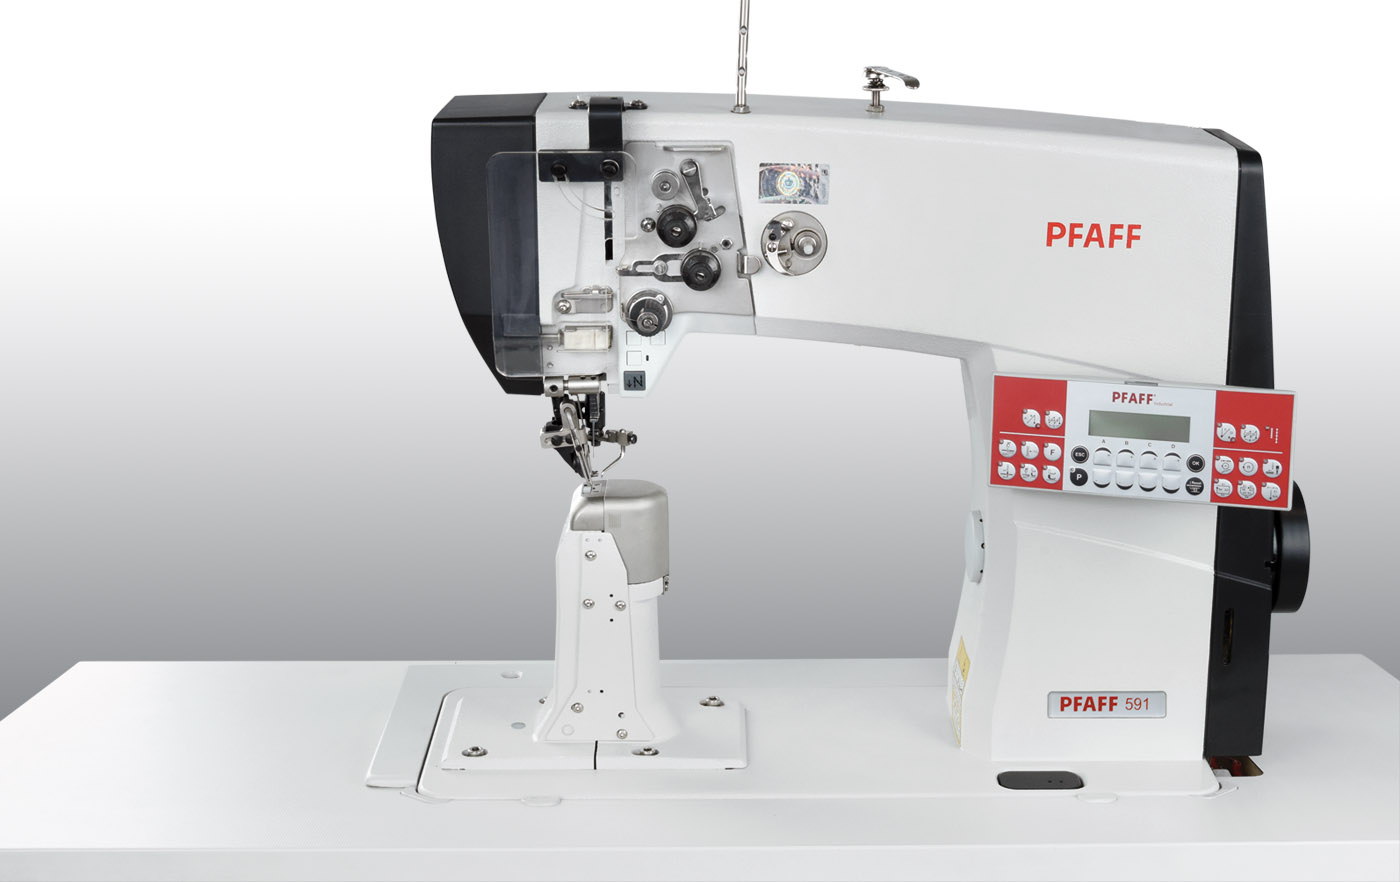 Purchase Energy-Saving, Industrial Hand Stitch Sewing Machine 